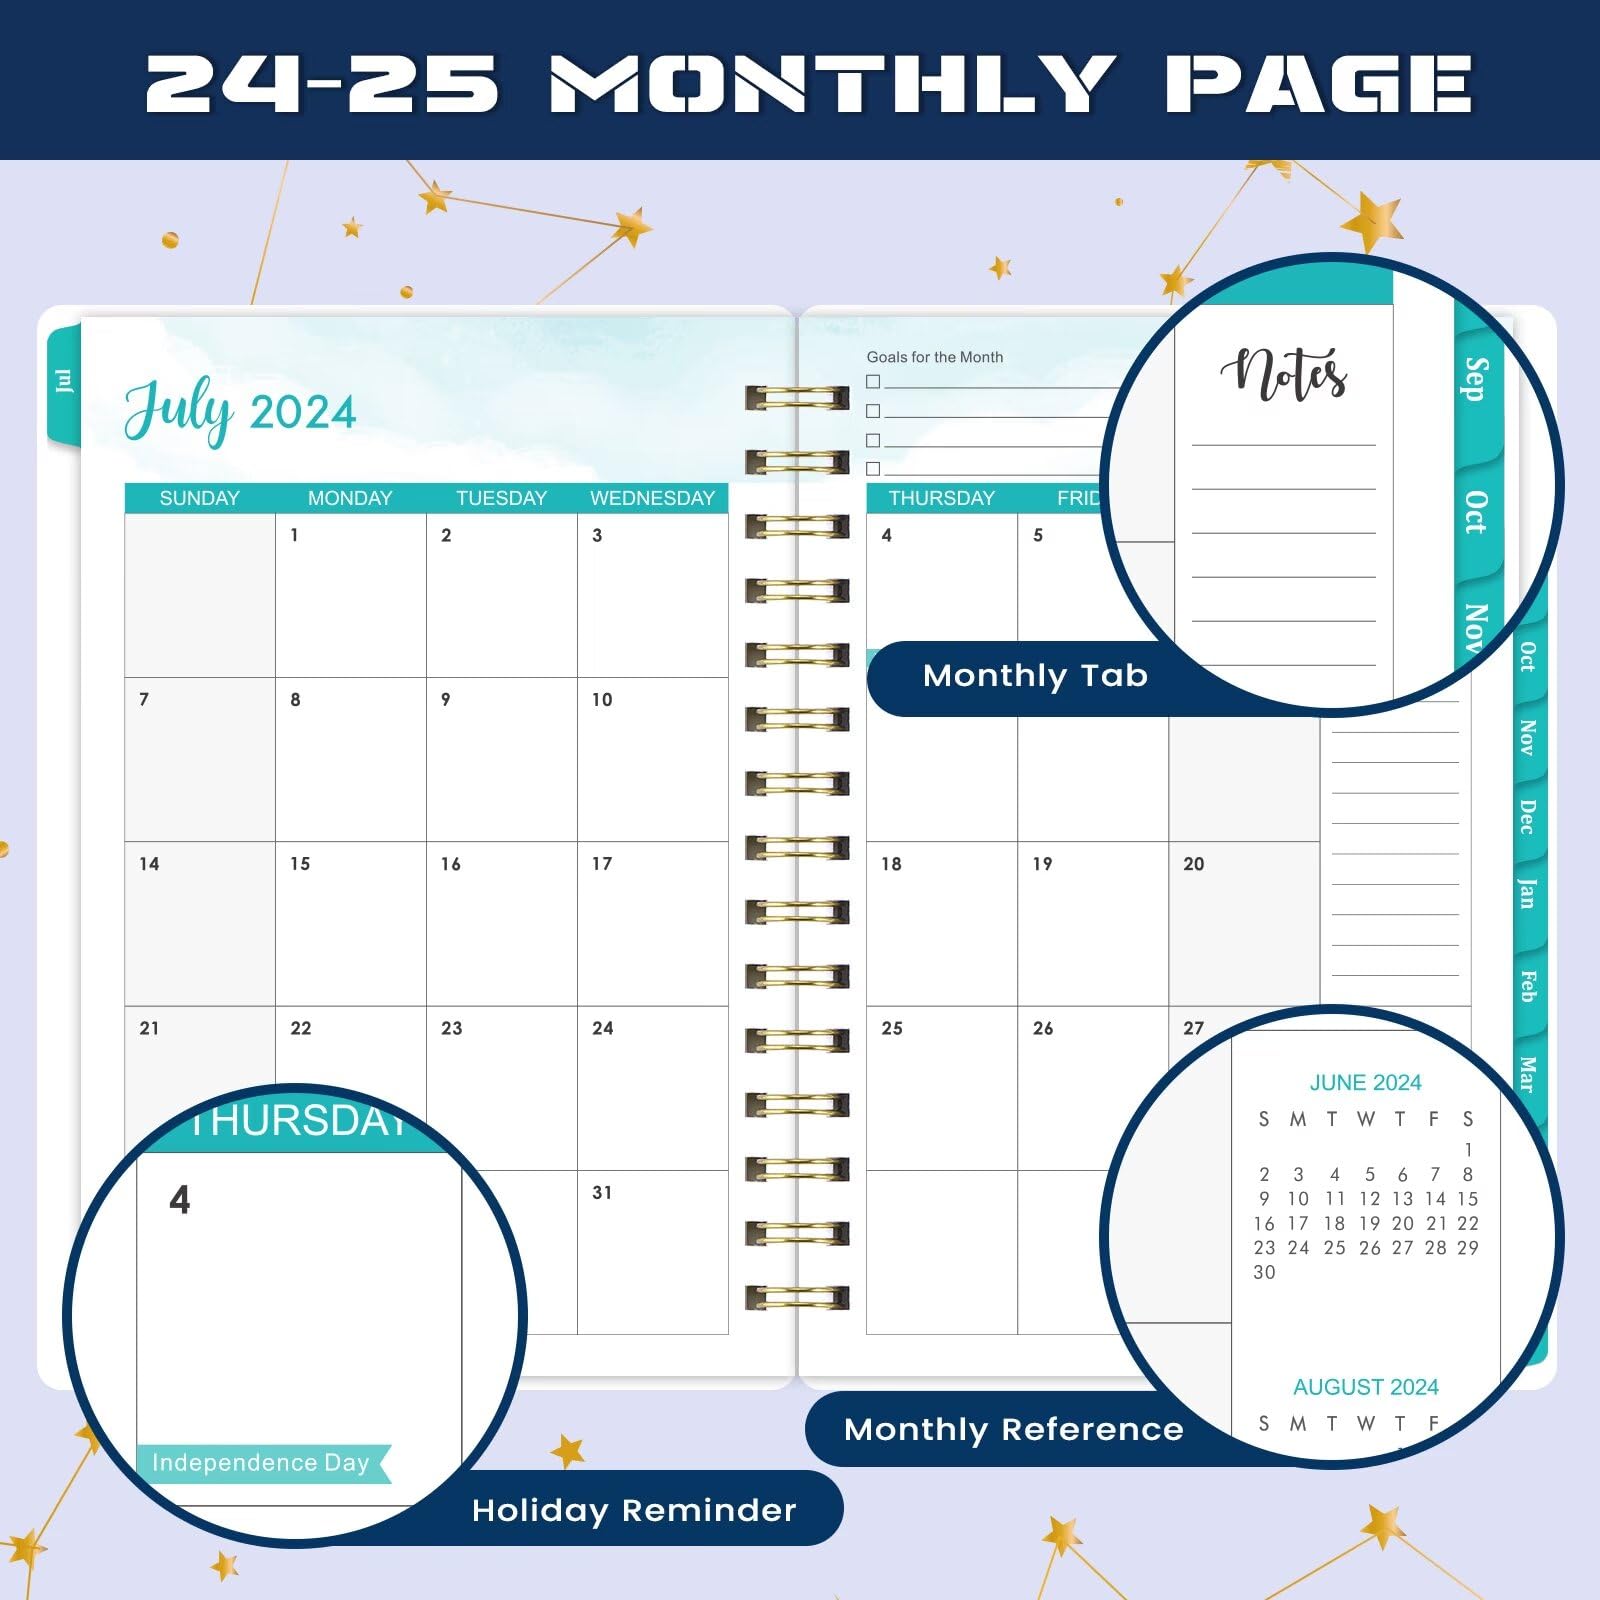 Student Planner 2024-2025 - School Planner, JUL 2024 - JUN 2025, 6.3" x 8.4", Monthly Weekly Planner/Agenda, Thick Paper + Holidays + 3-Hole Punched + Twin-Wire Binding, Stickers, Blue